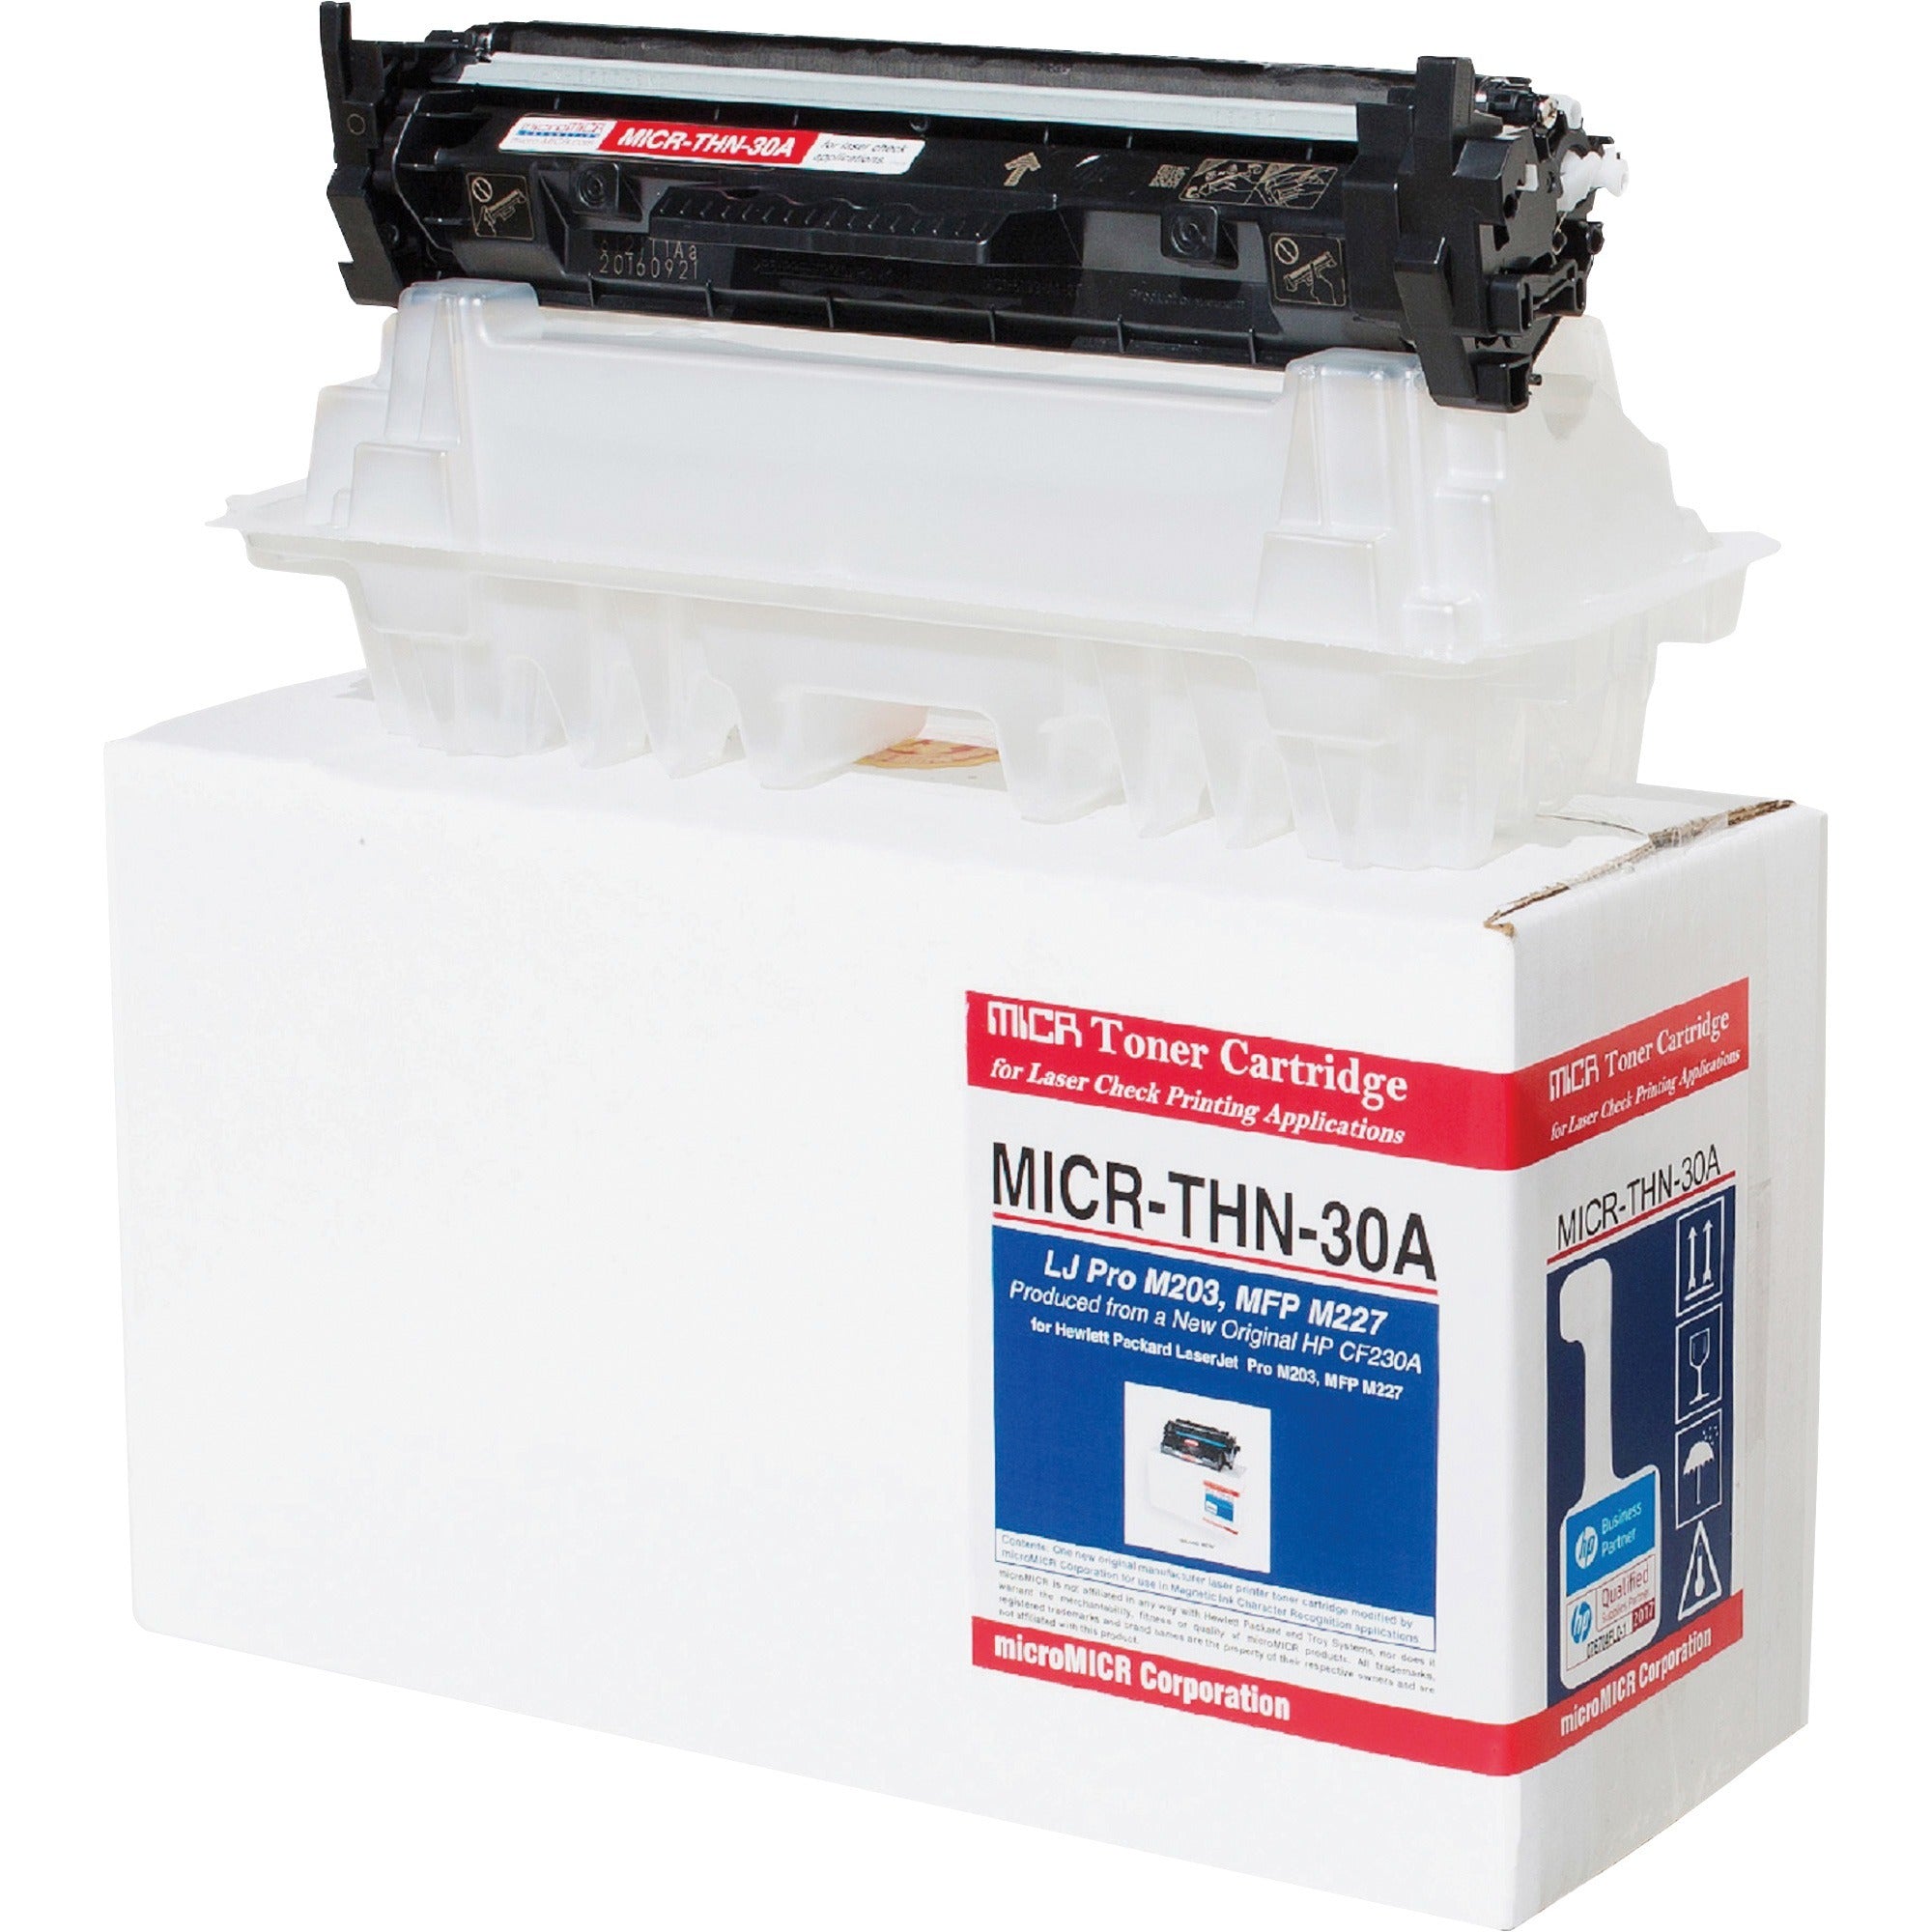 micromicr-micr-standard-yield-laser-toner-cartridge-alternative-for-hp-cf230a-black-1-each-1600-pages_mcmmicrthn30a - 1